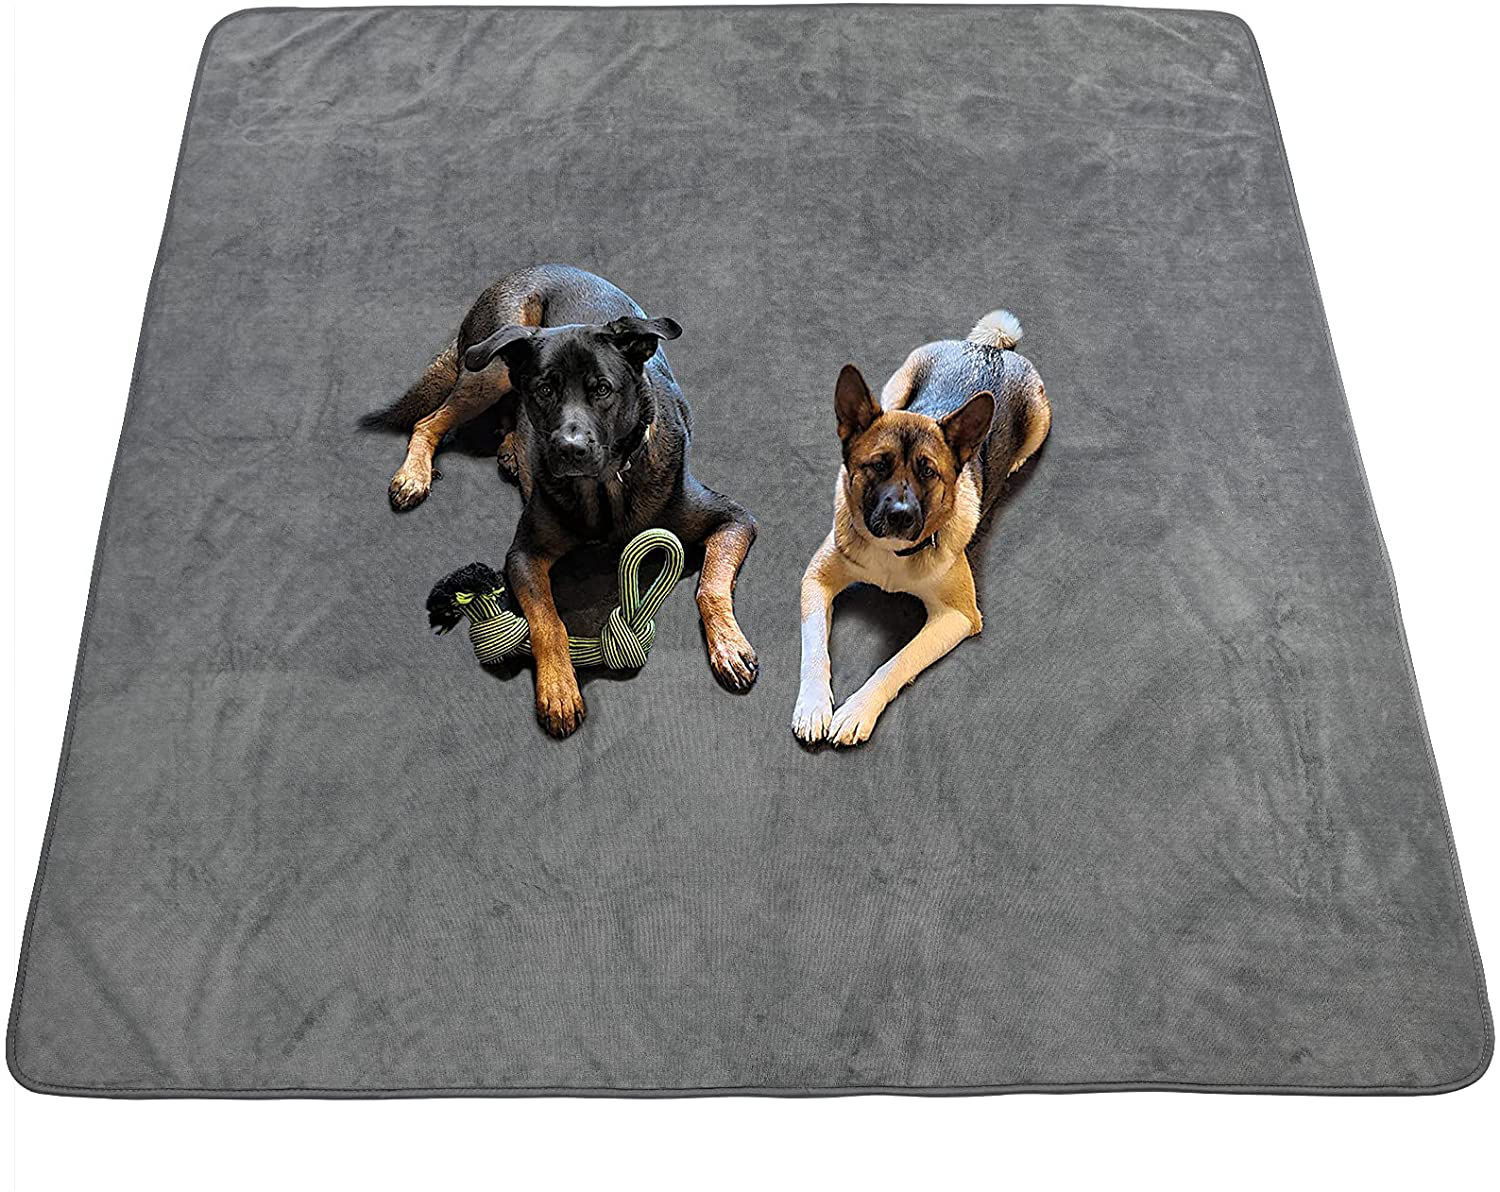 Dog Pee Pad Washable-Extra Large 72X72/65X48 Instant Absorb Training Pads Non-Slip Pet Playpen Mat Waterproof Reusable Floor Mat for Puppy/Senior Dog Whelping Incontinence Housebreaking